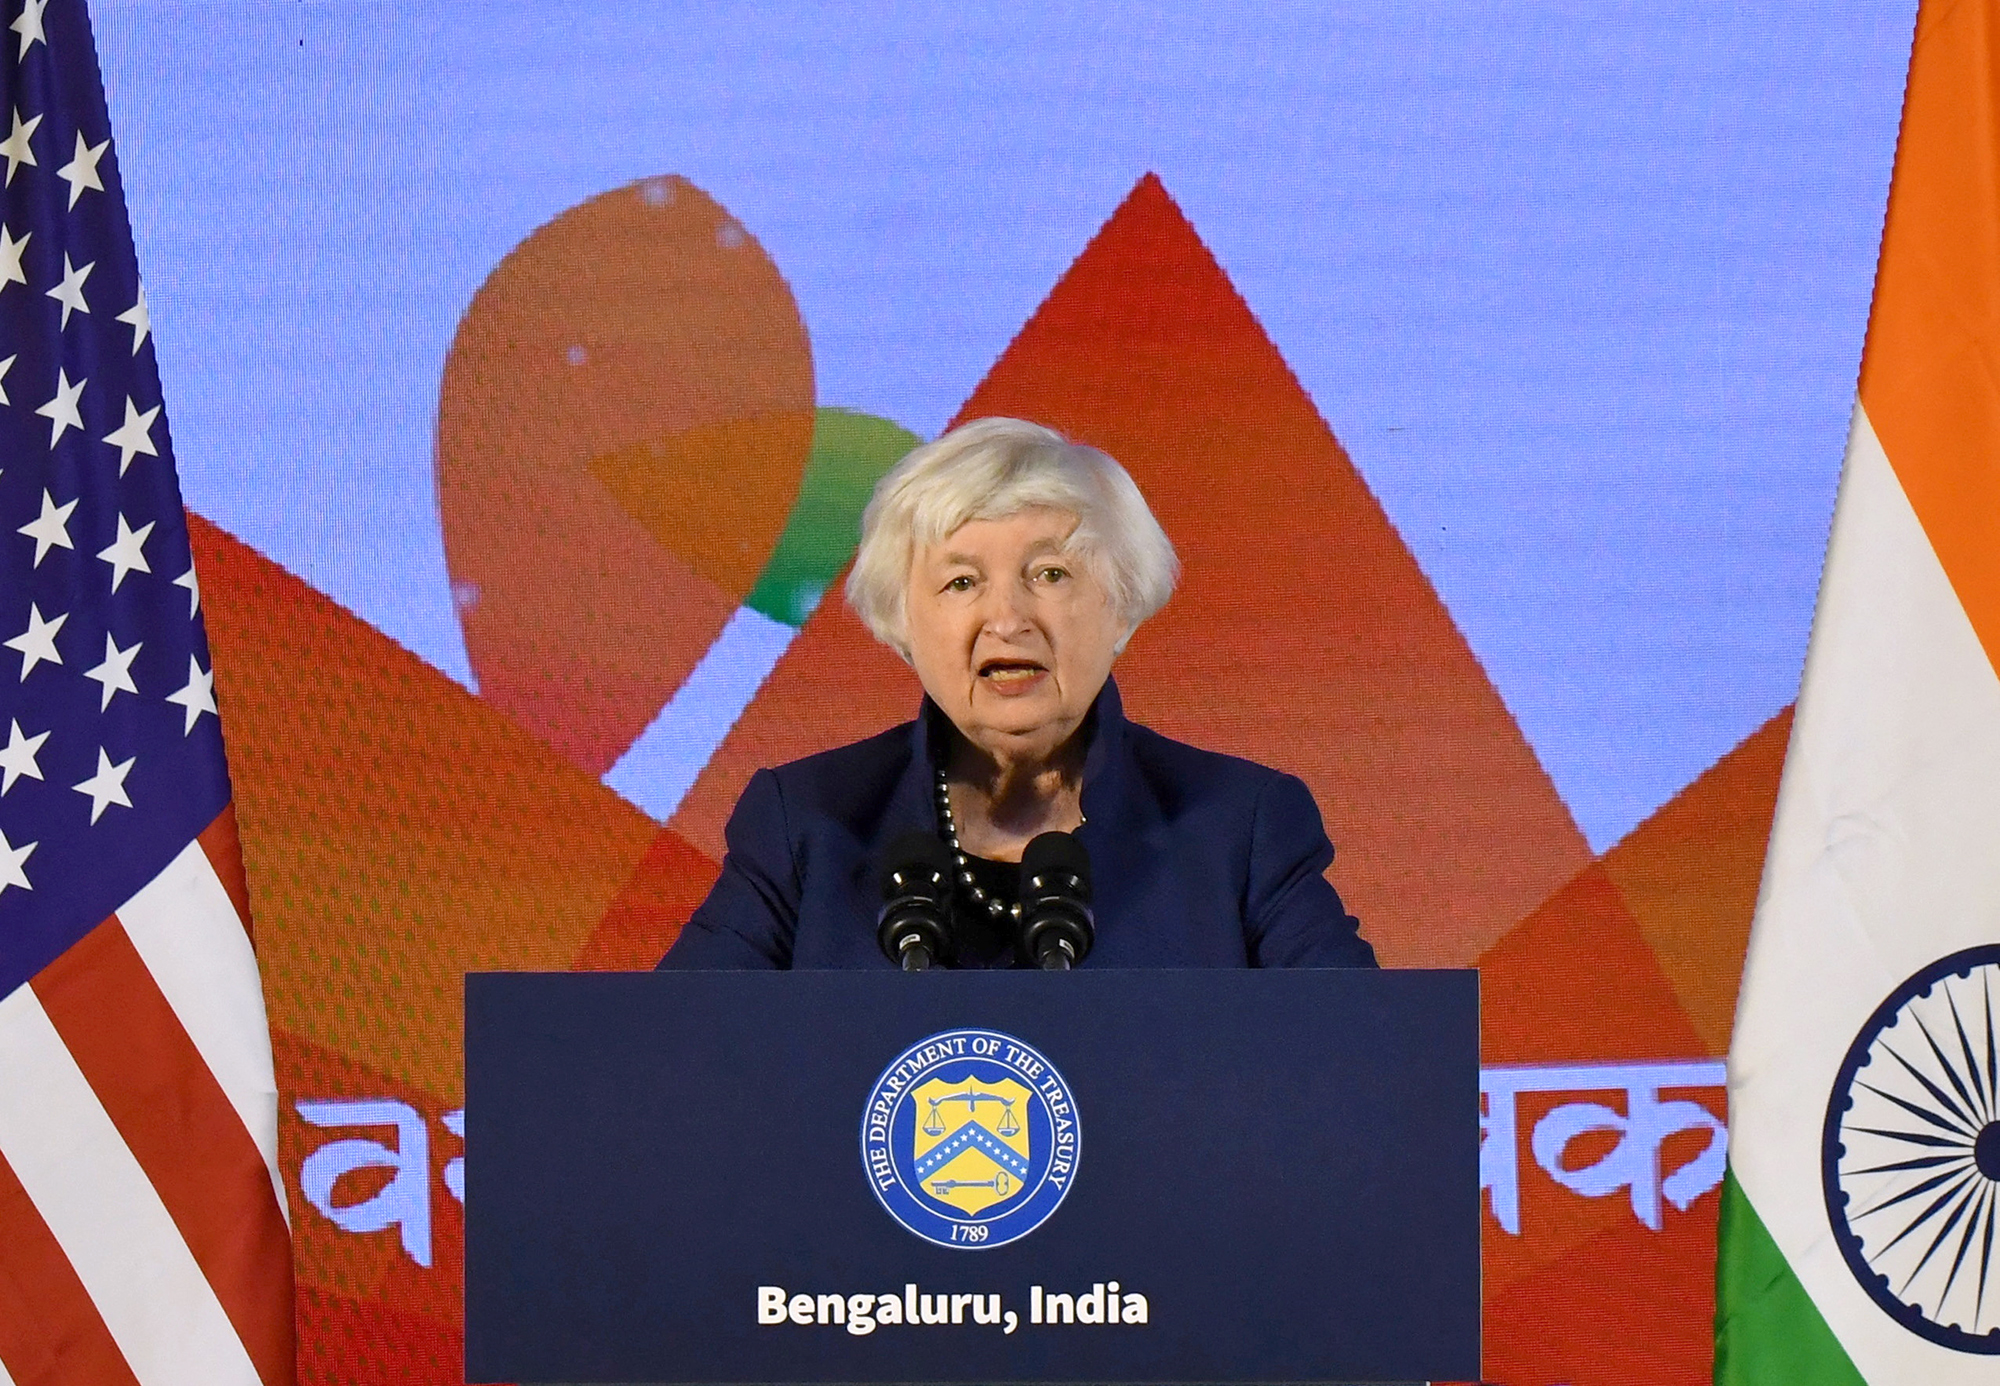 U.S. Treasury Secretary Janet Yellen speaks during a news conference as G20 finance leaders gather on the outskirts of Bengaluru, India, on February 23.